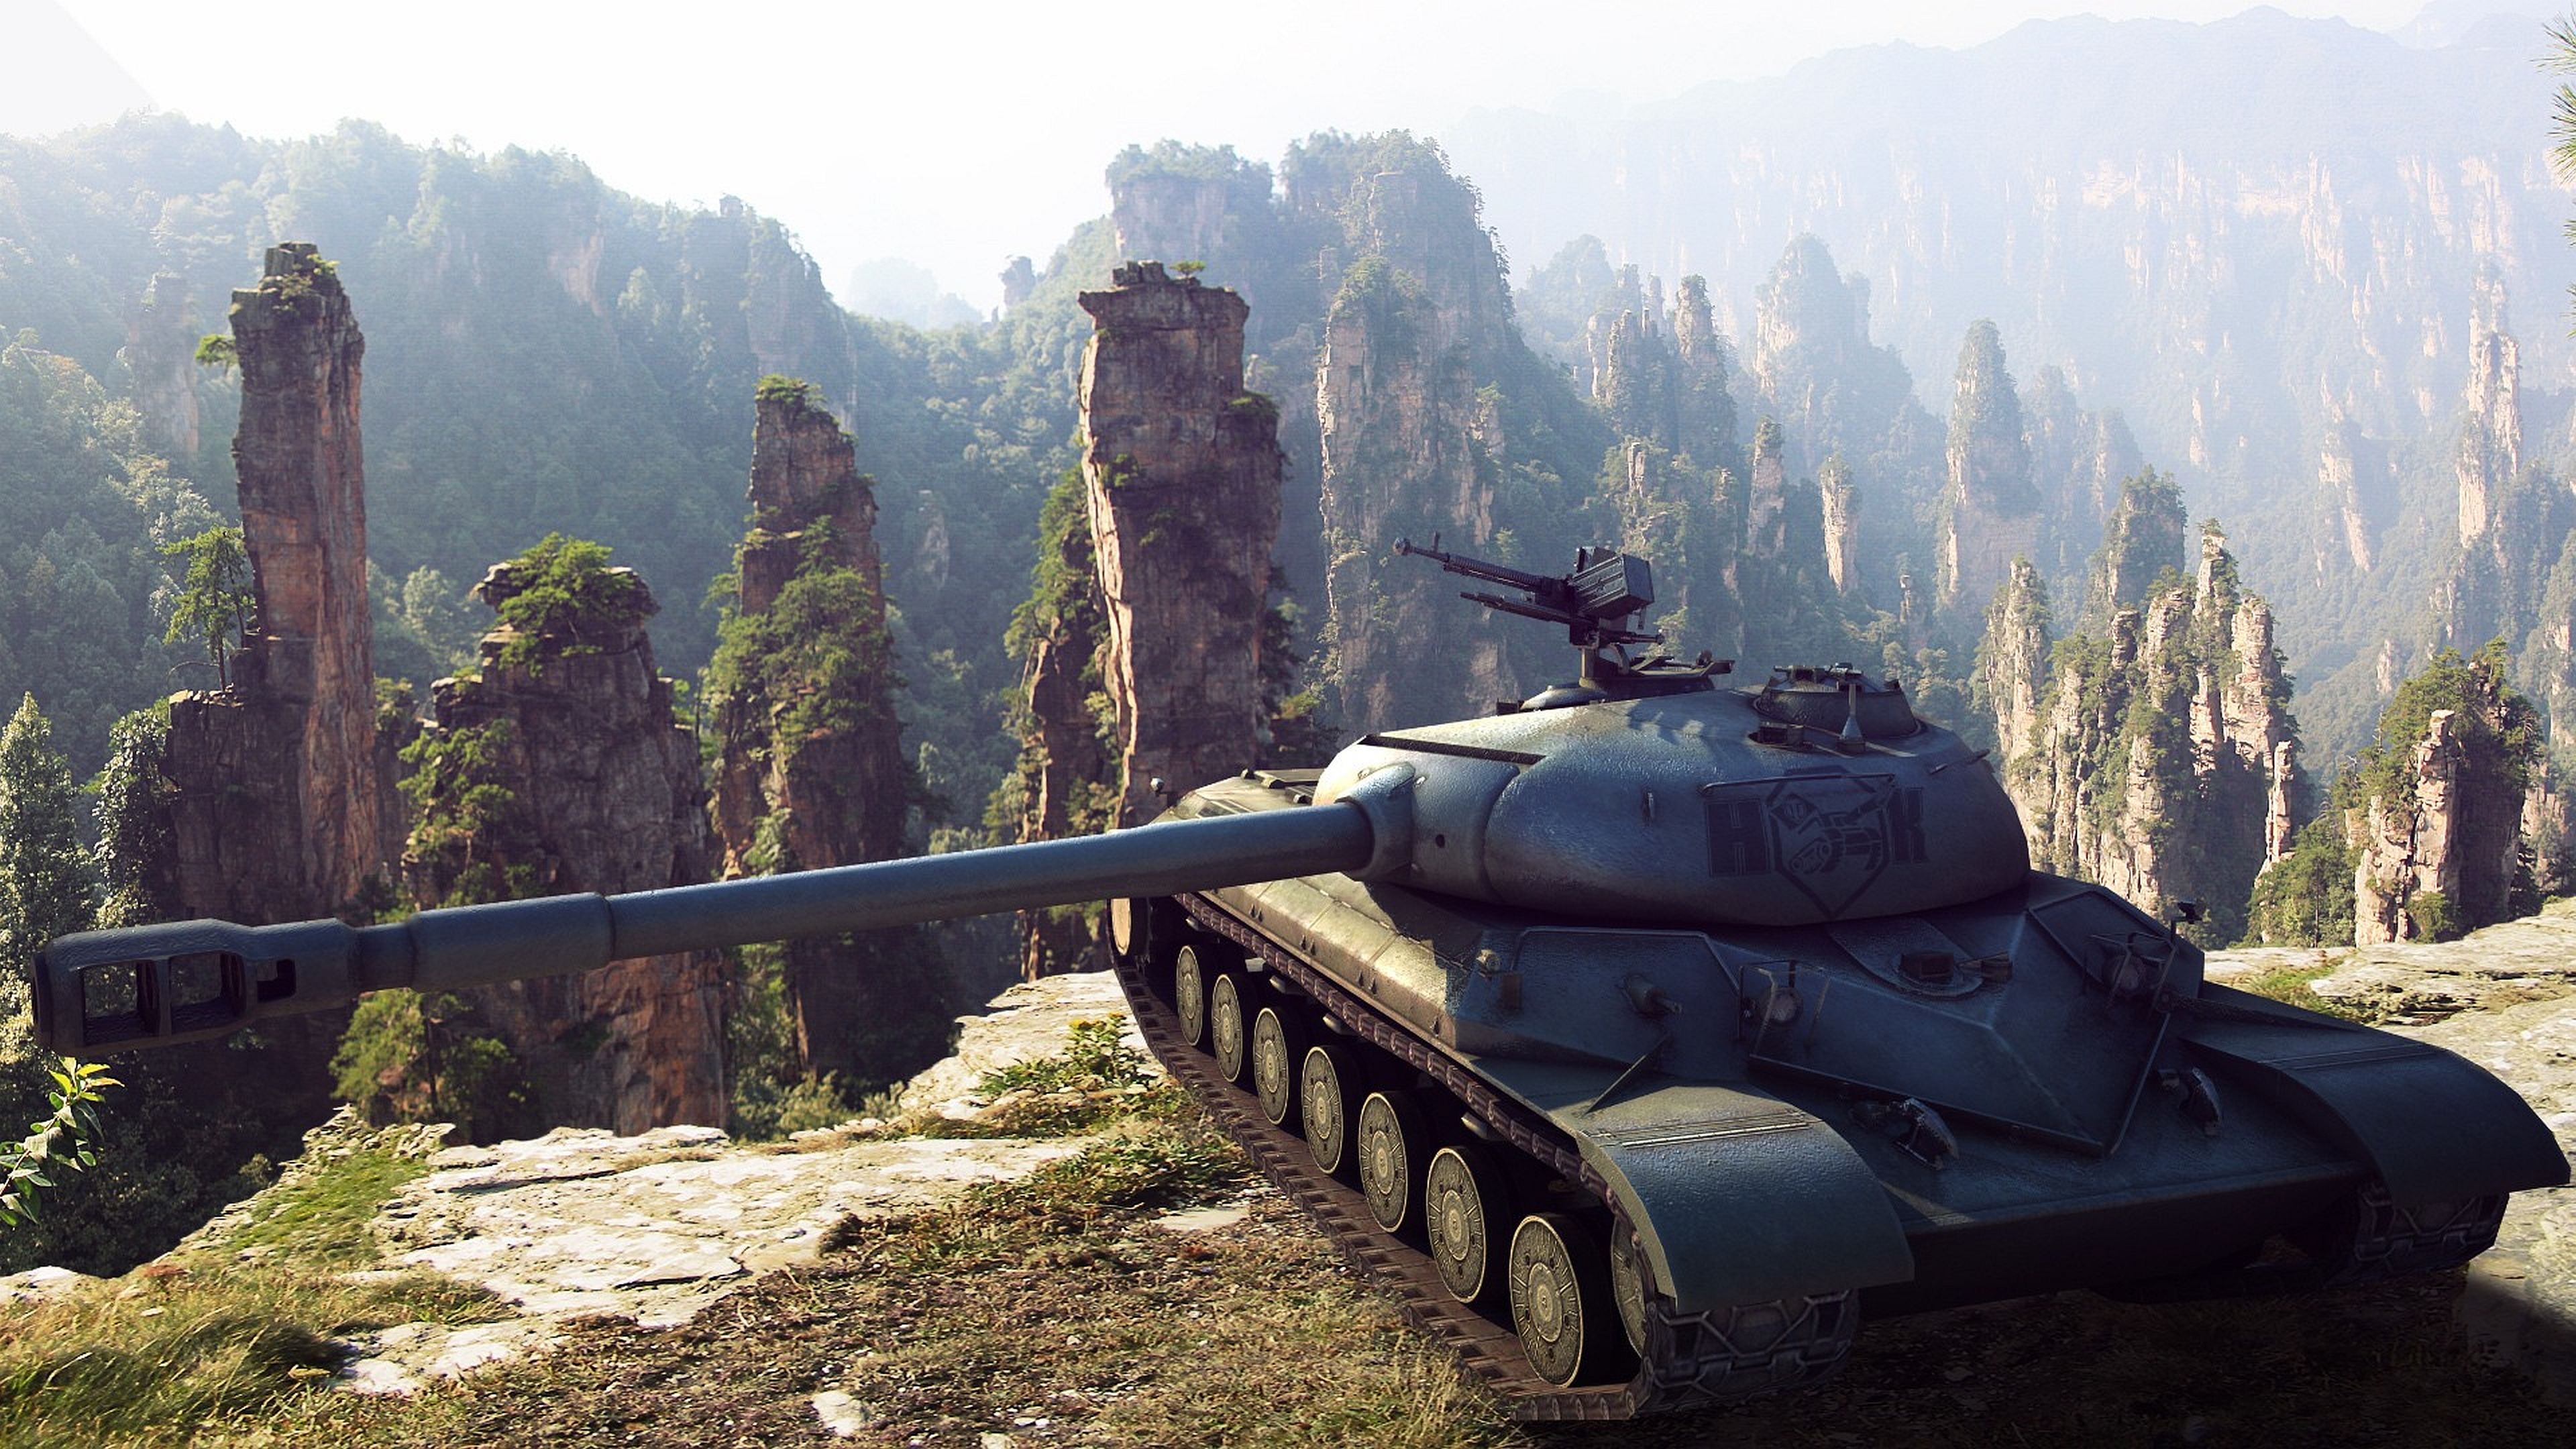 video game, world of tanks